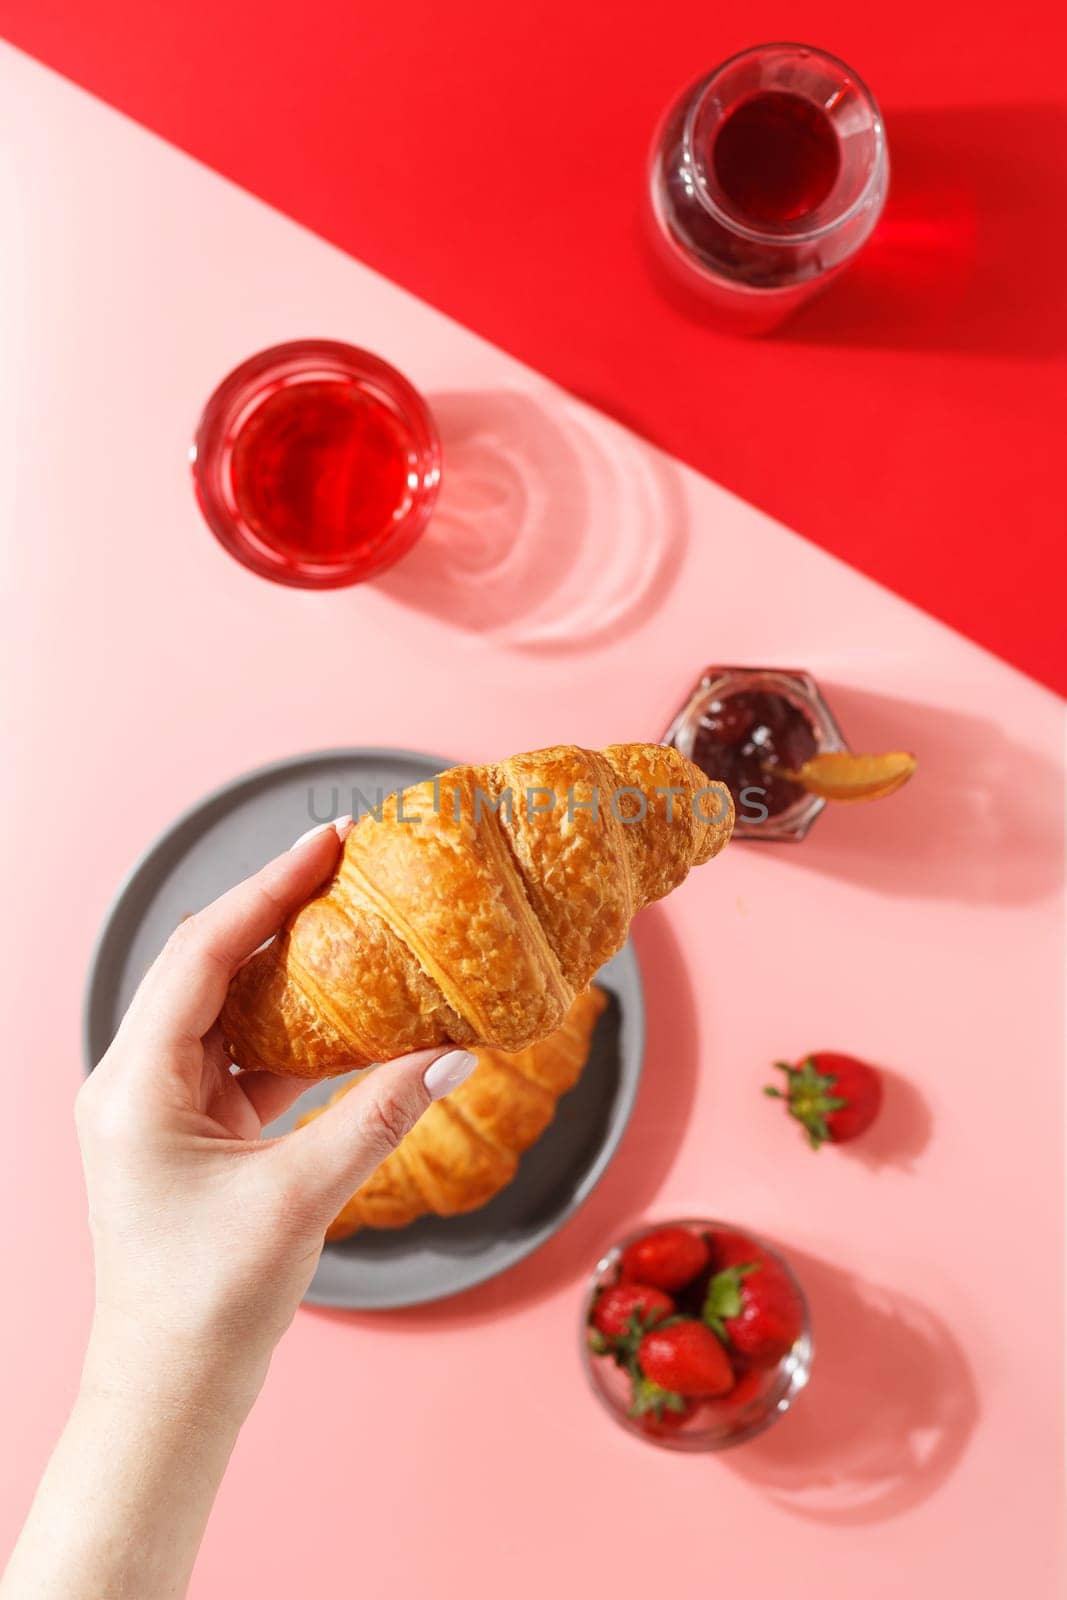 A woman's hand holds a kraussant over a plate with fresh puff croissants, berry juice, jam and fresh berries on a pink and red background.